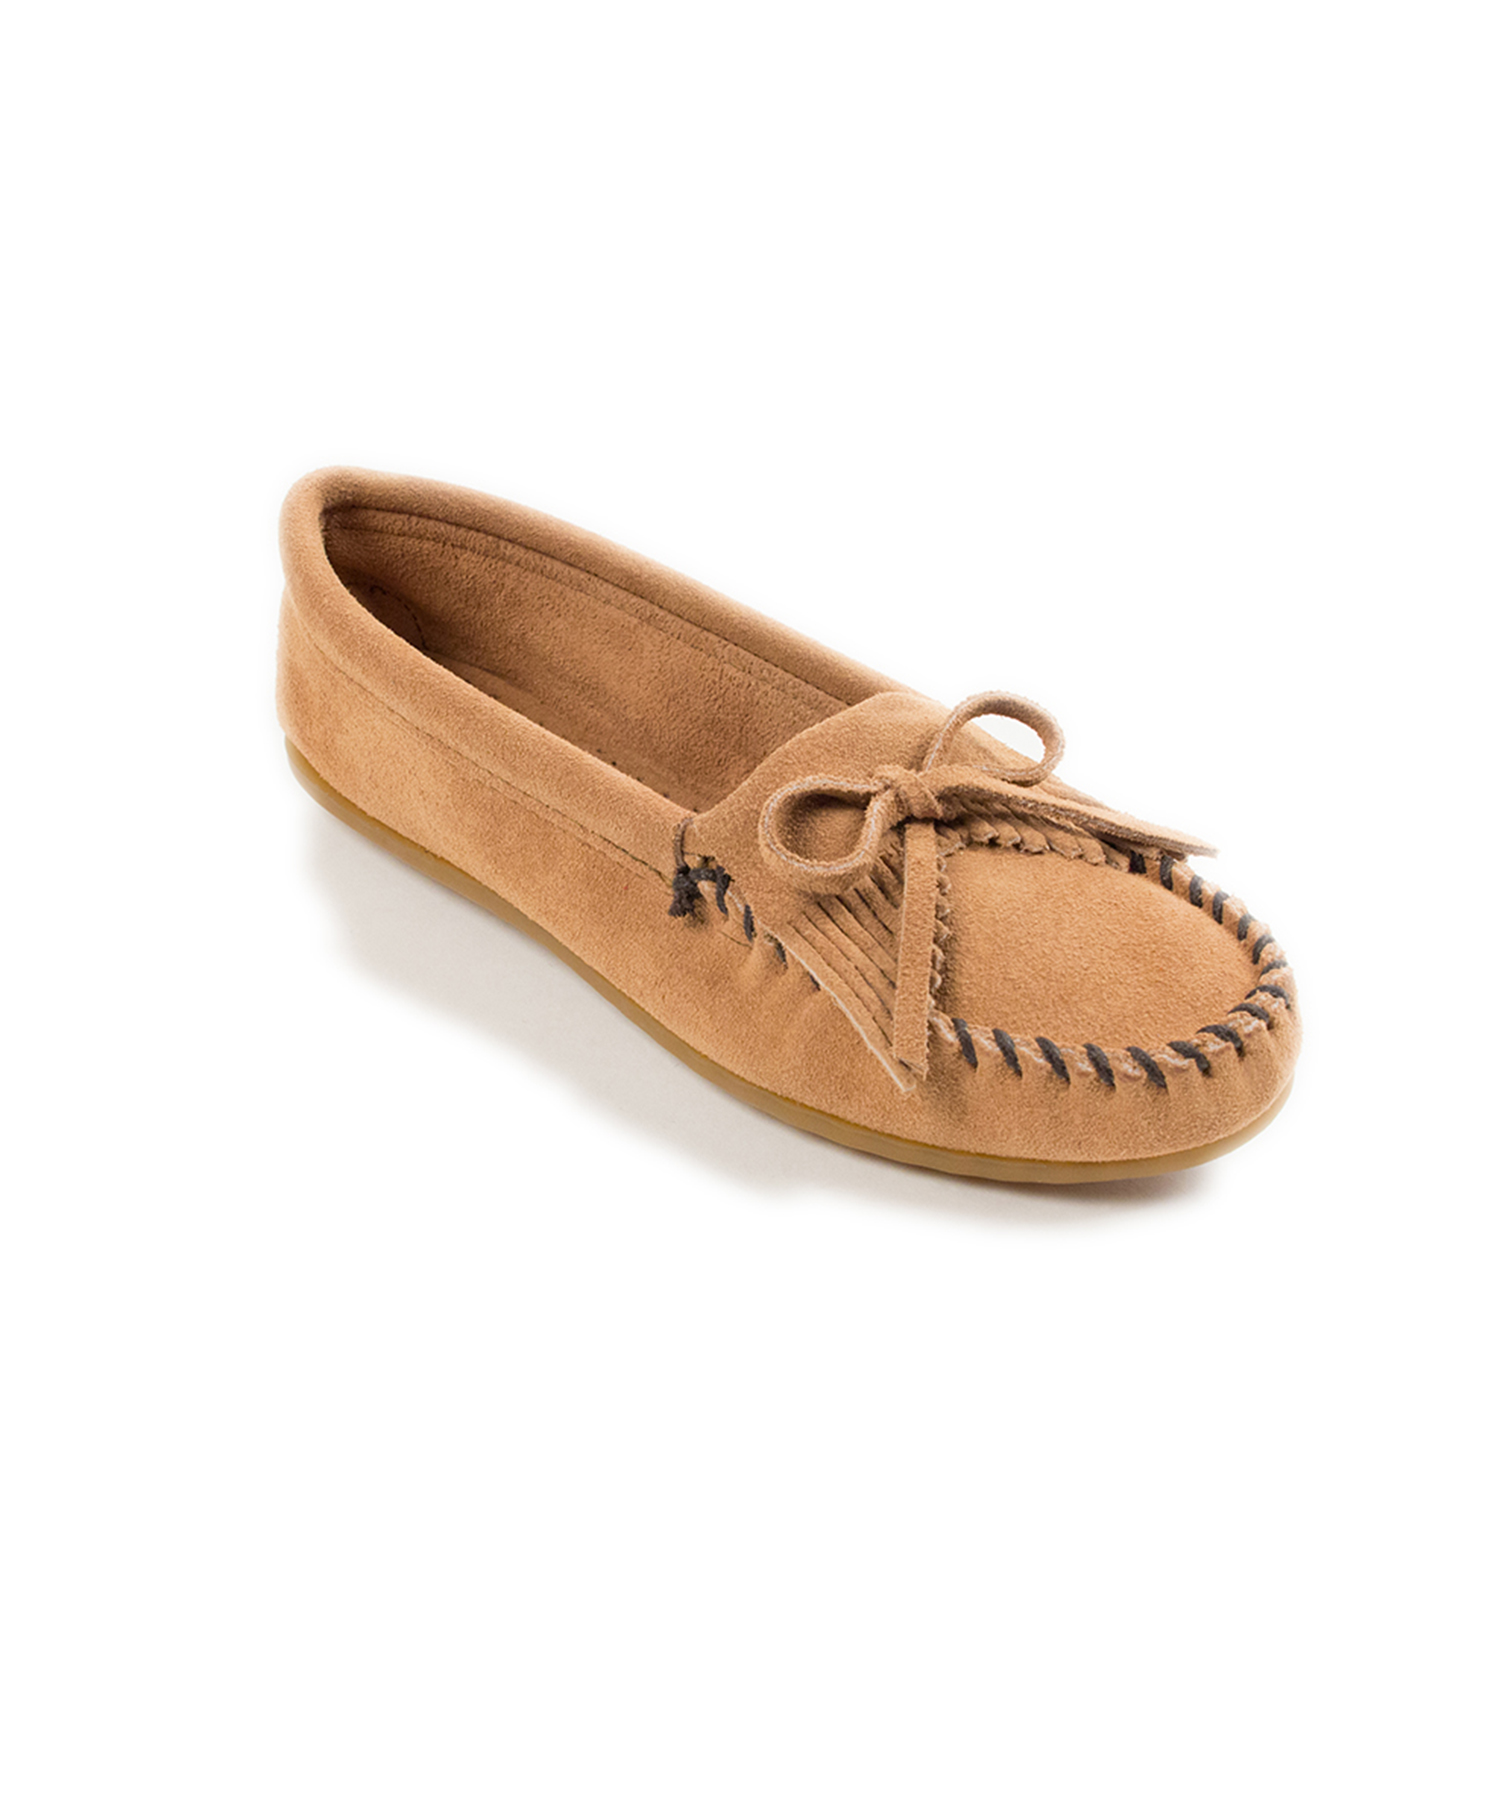 KILTY SUEDE MOC Taupe 【37110021】｜ミネトンカモカシン 公式通販サイト｜MINNETONKA MOCCASIN